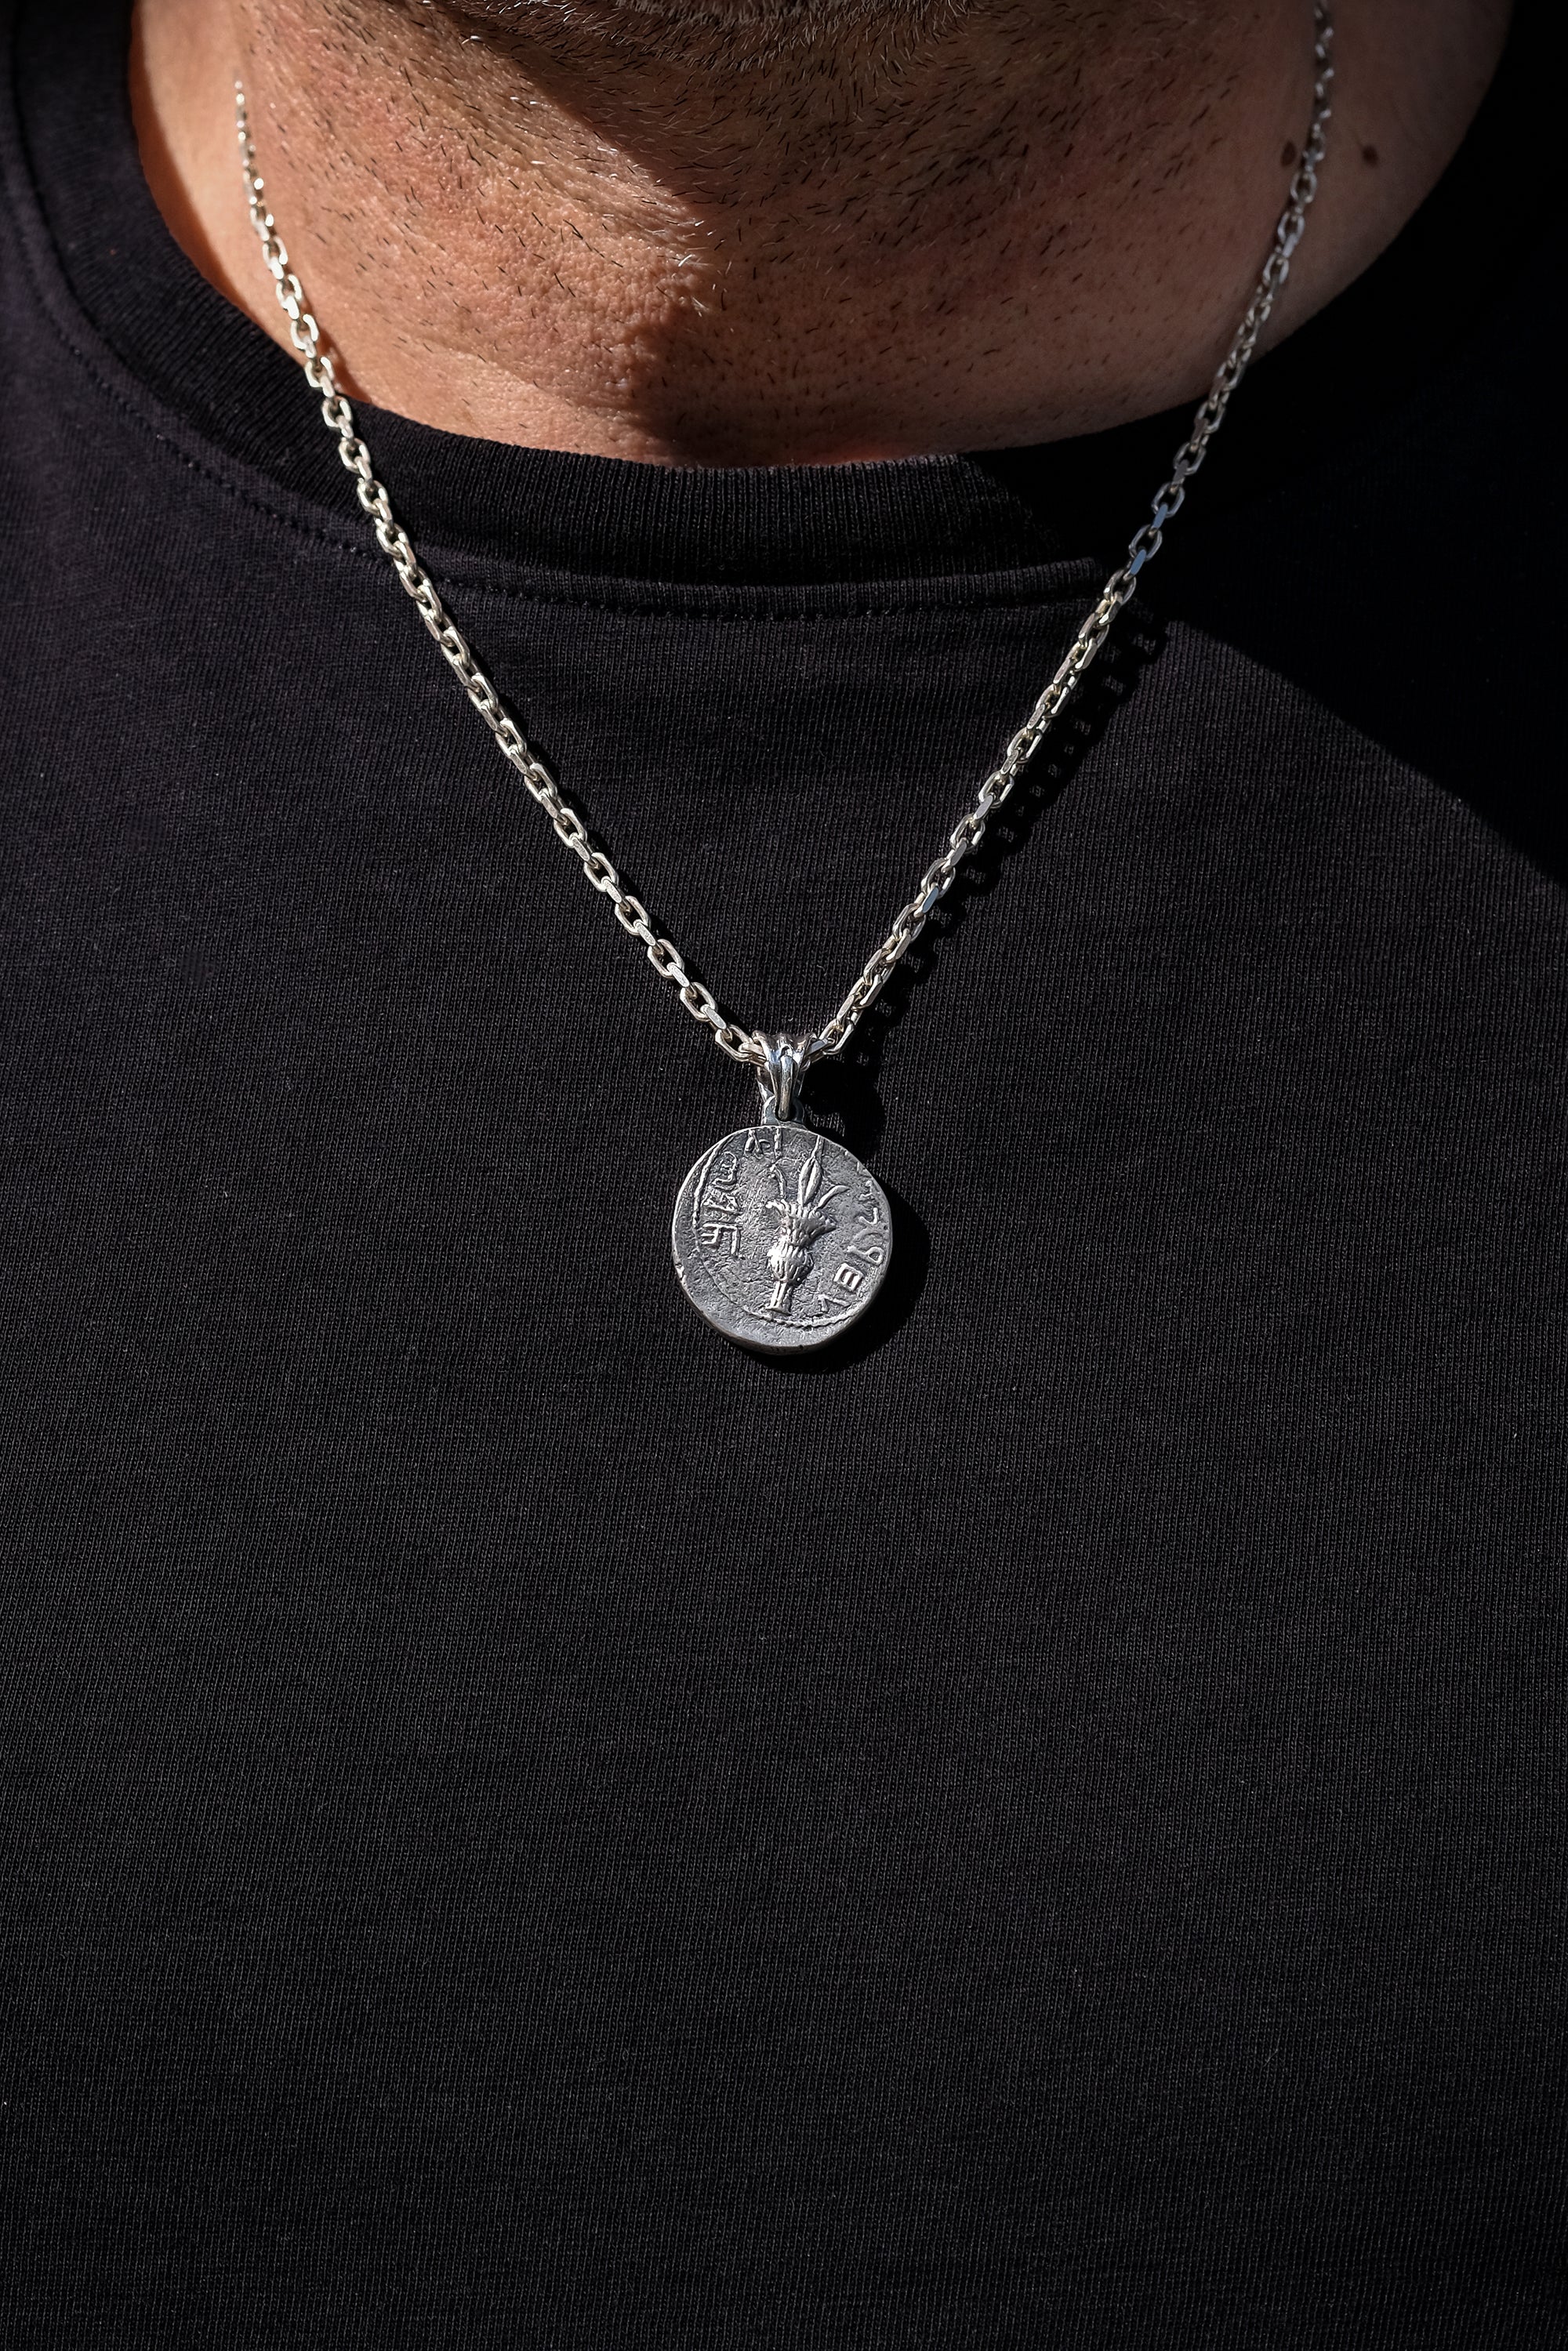 Silver Necklace For Men With A Replica Of A Ancient Jewish Coin Pendant